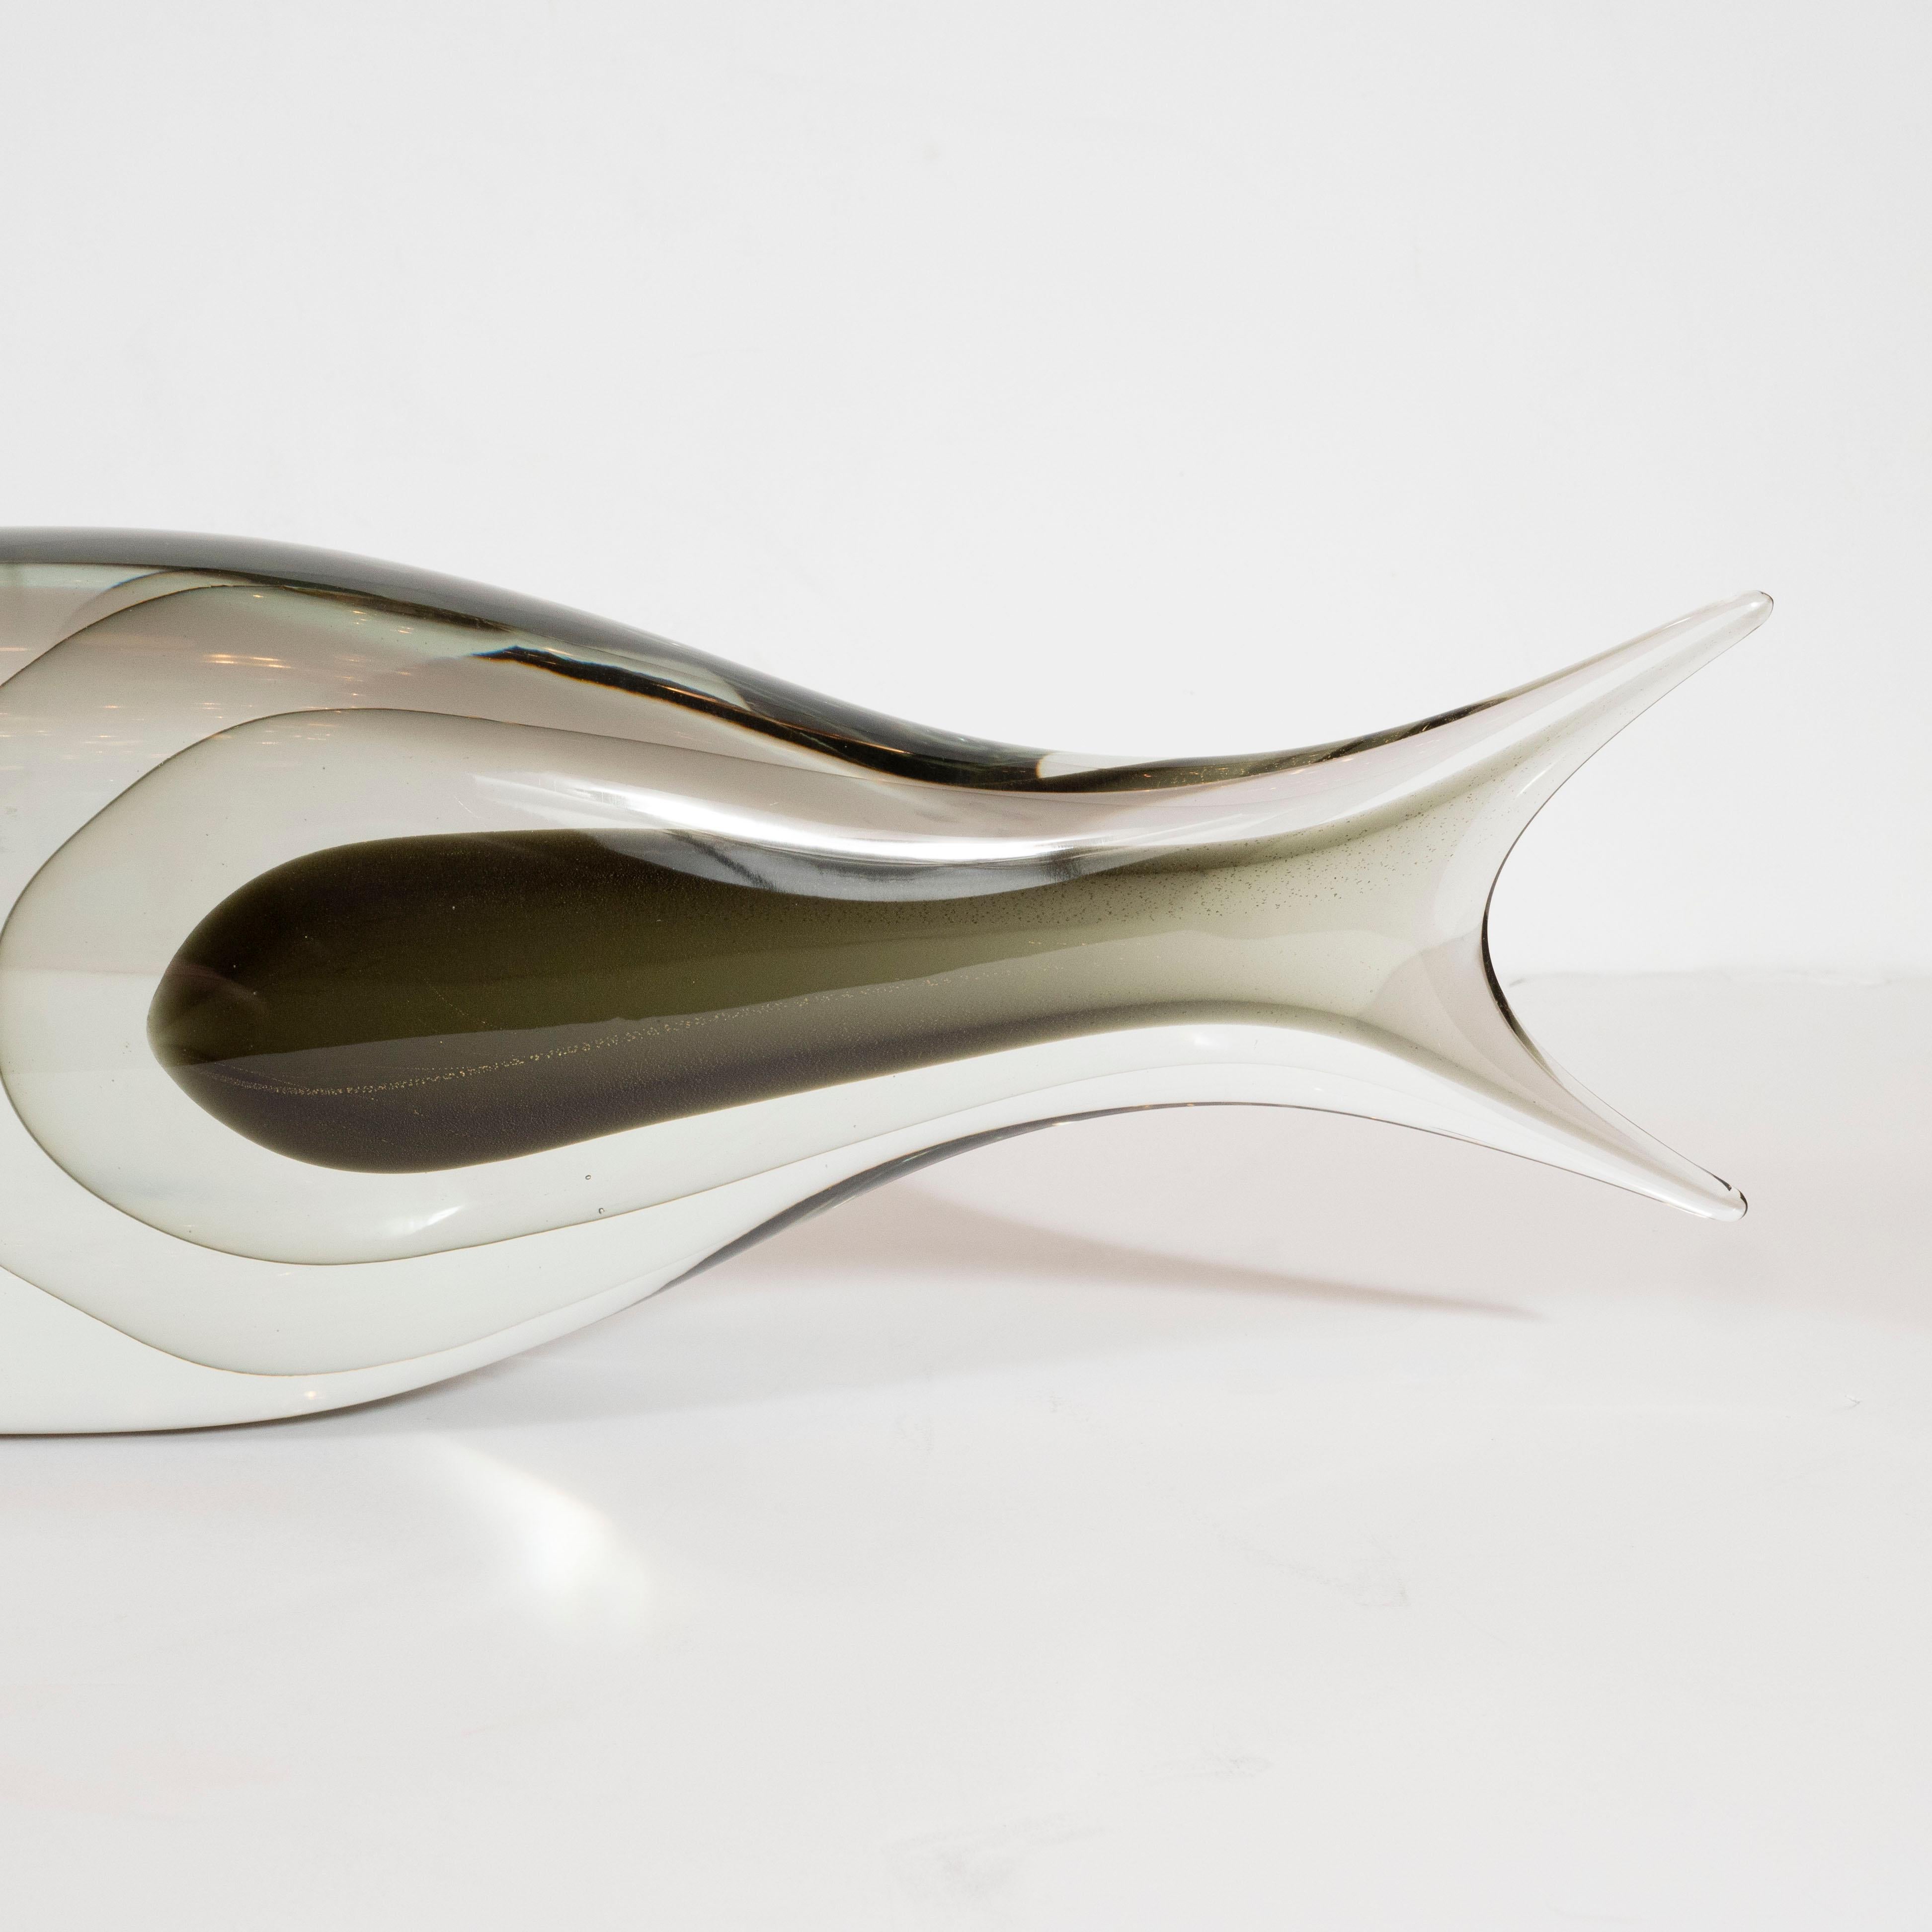 Contemporary Modernist Stylized Fish Sculpture in Handblown Smoked & Translucent Murano Glass